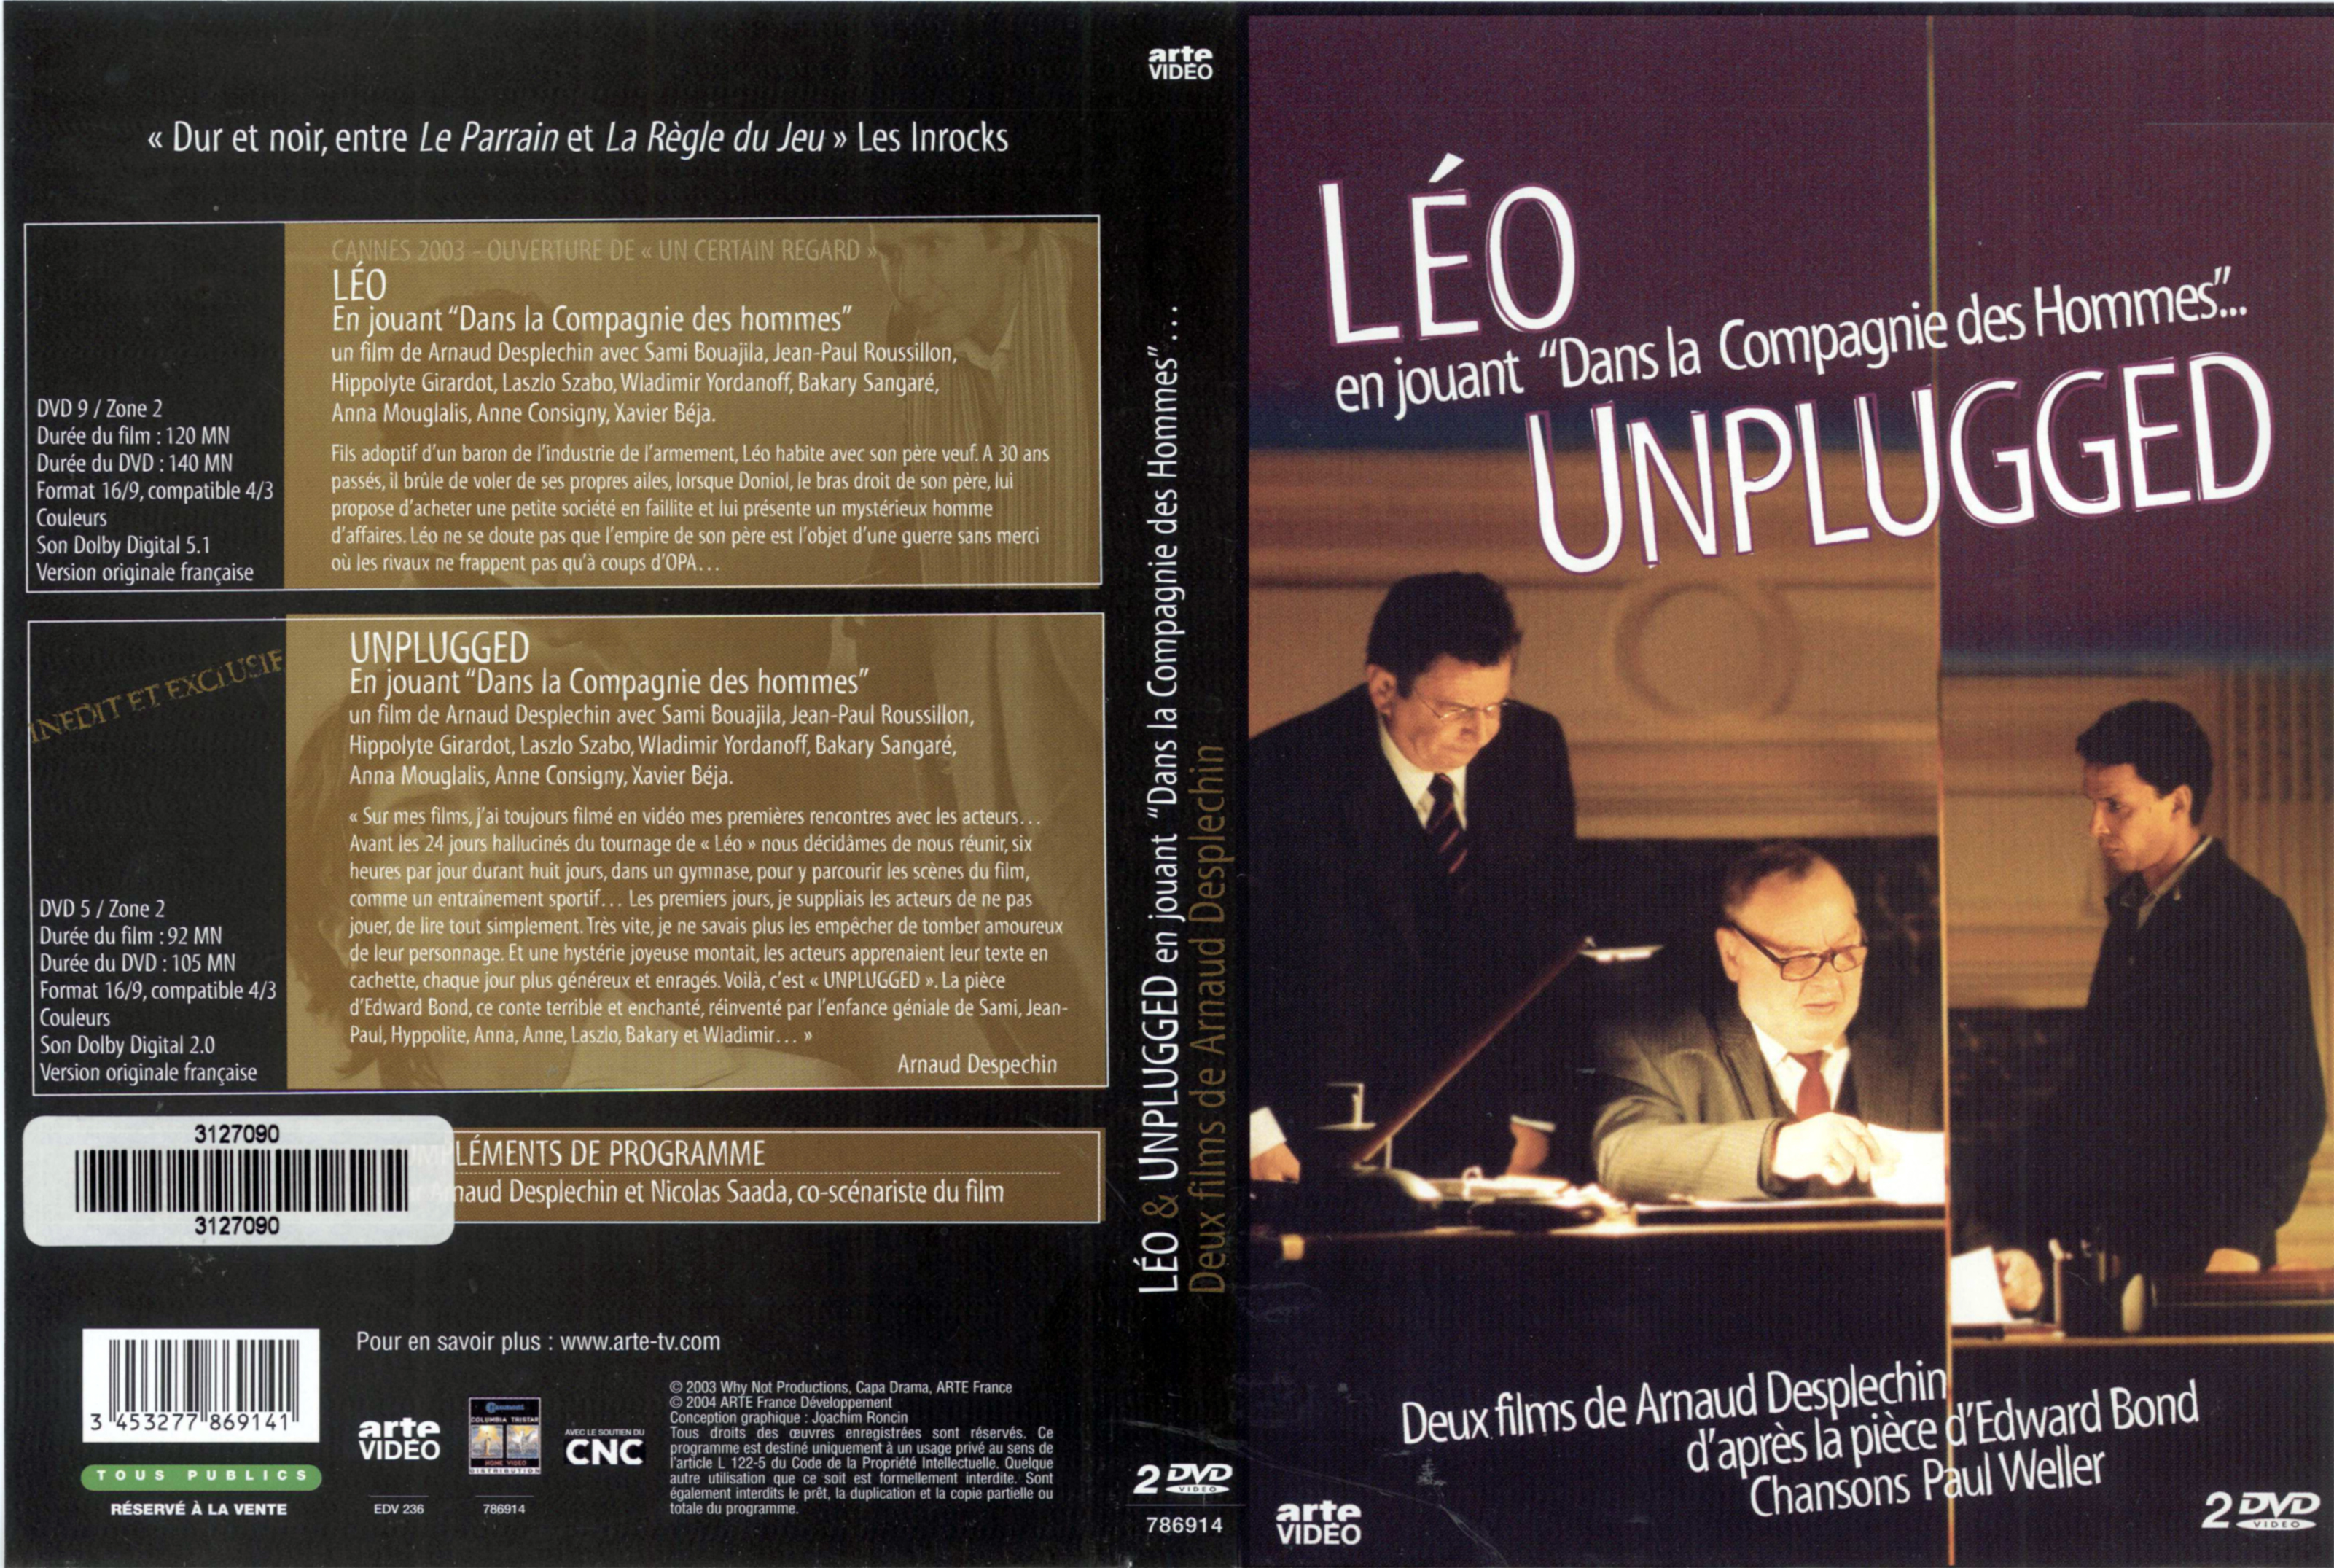 Jaquette DVD Lo & Unplugged